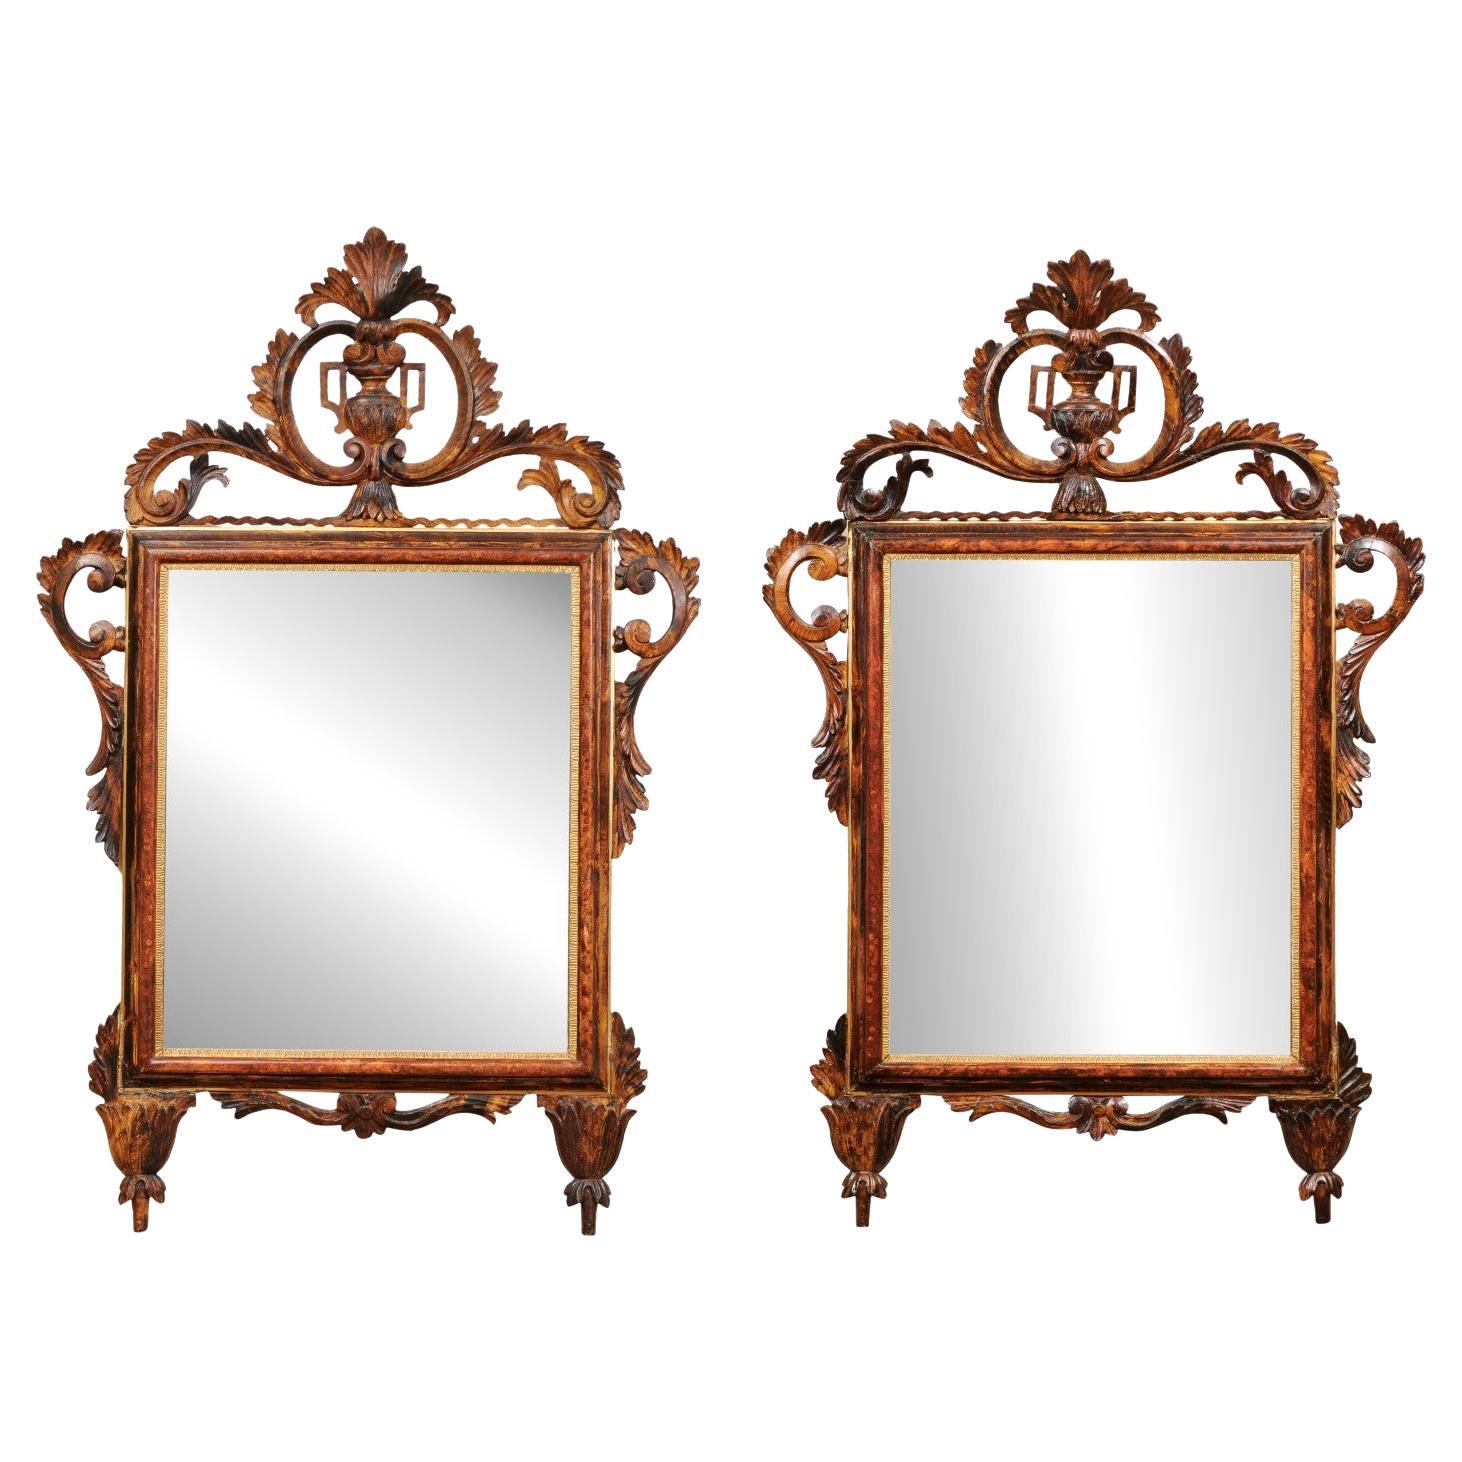 Pair of 19th Century Italian Neoclassical Faux Grain Painted Mirrors  For Sale